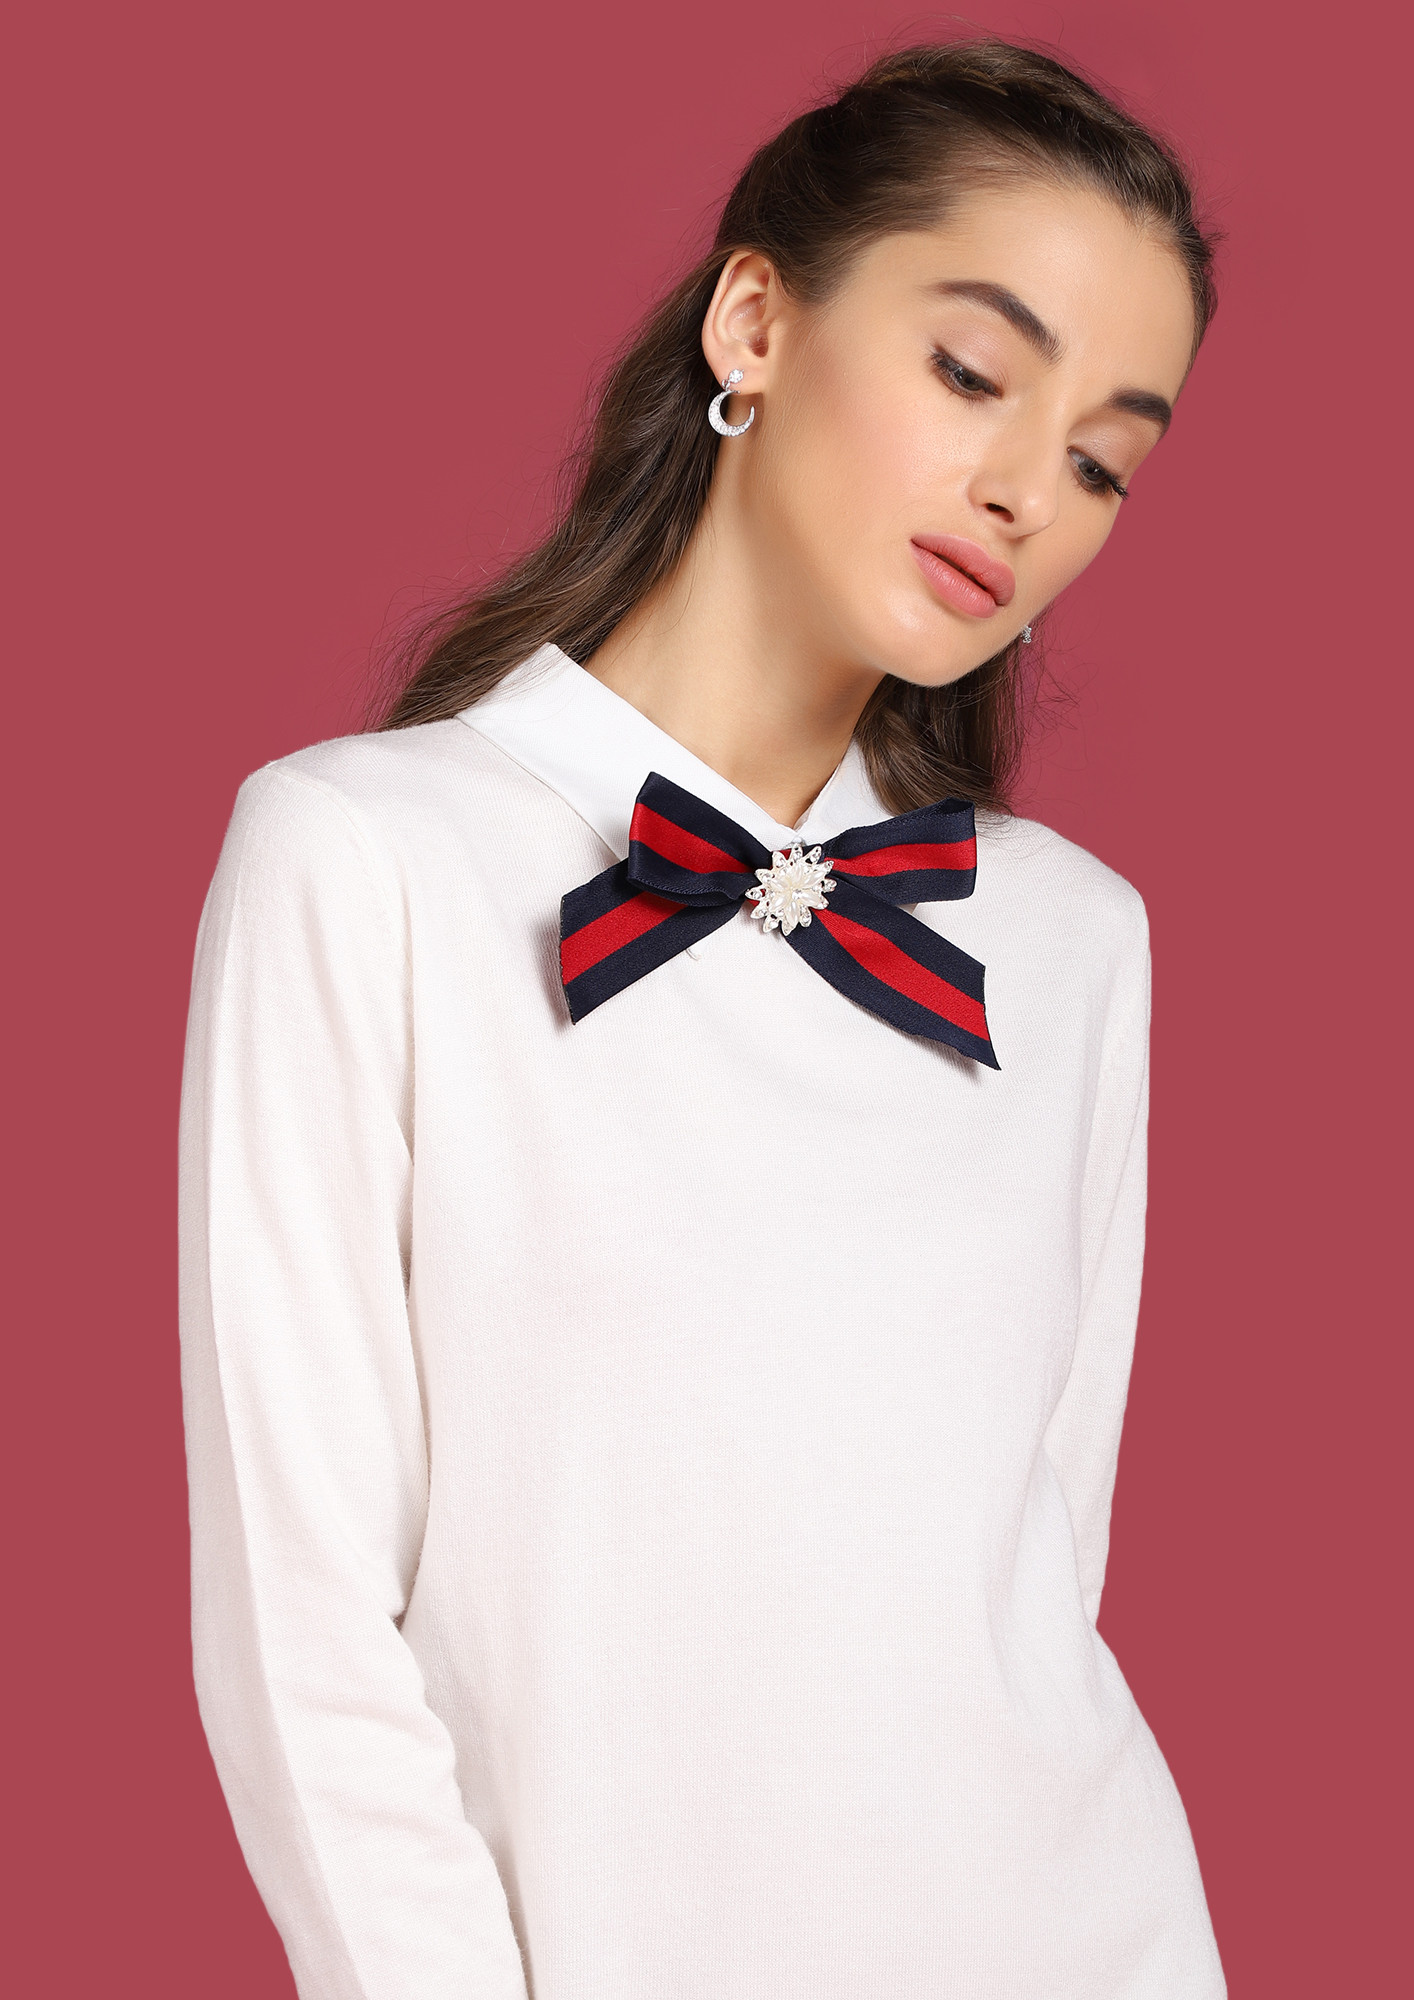 THE ALPHA WOMAN'S RED STRIPED BOW TIE